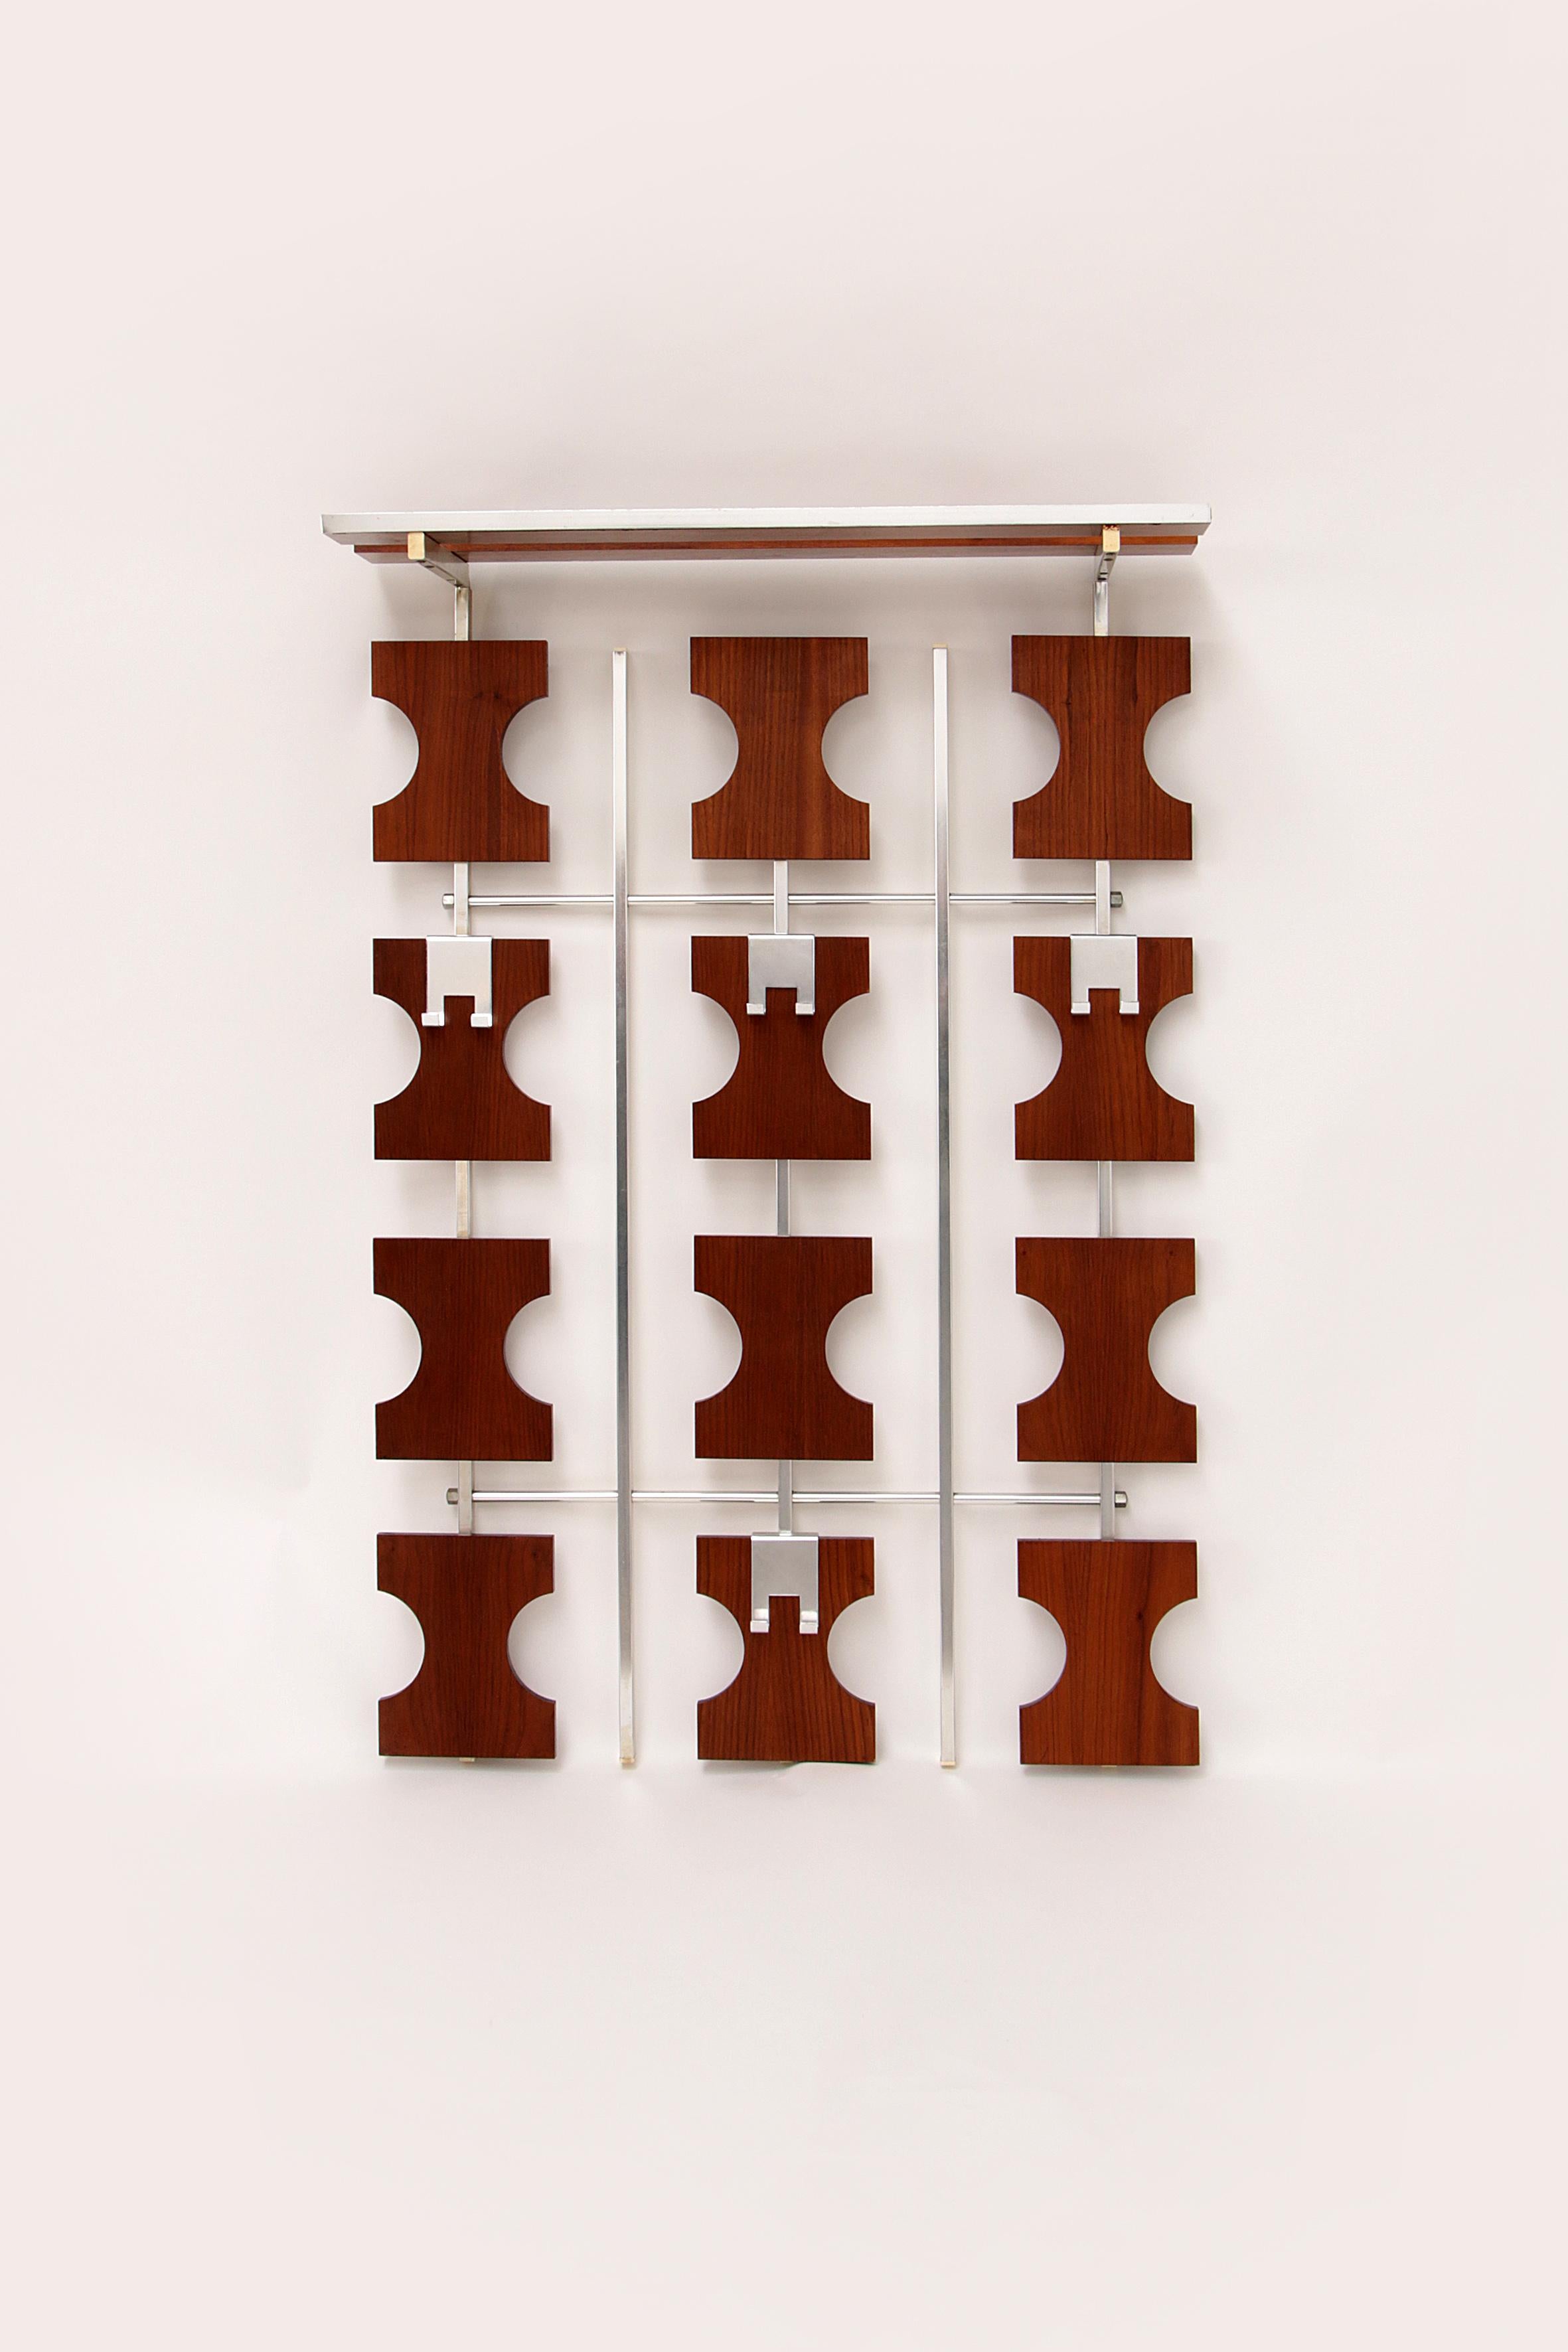 A beautiful example of sturdy and striking German design. This stylish wall coat rack will make a unique addition to any hallway.

Made of wood and metal with veneer.

The coat rack is made of wooden blocks with iron details that give it a